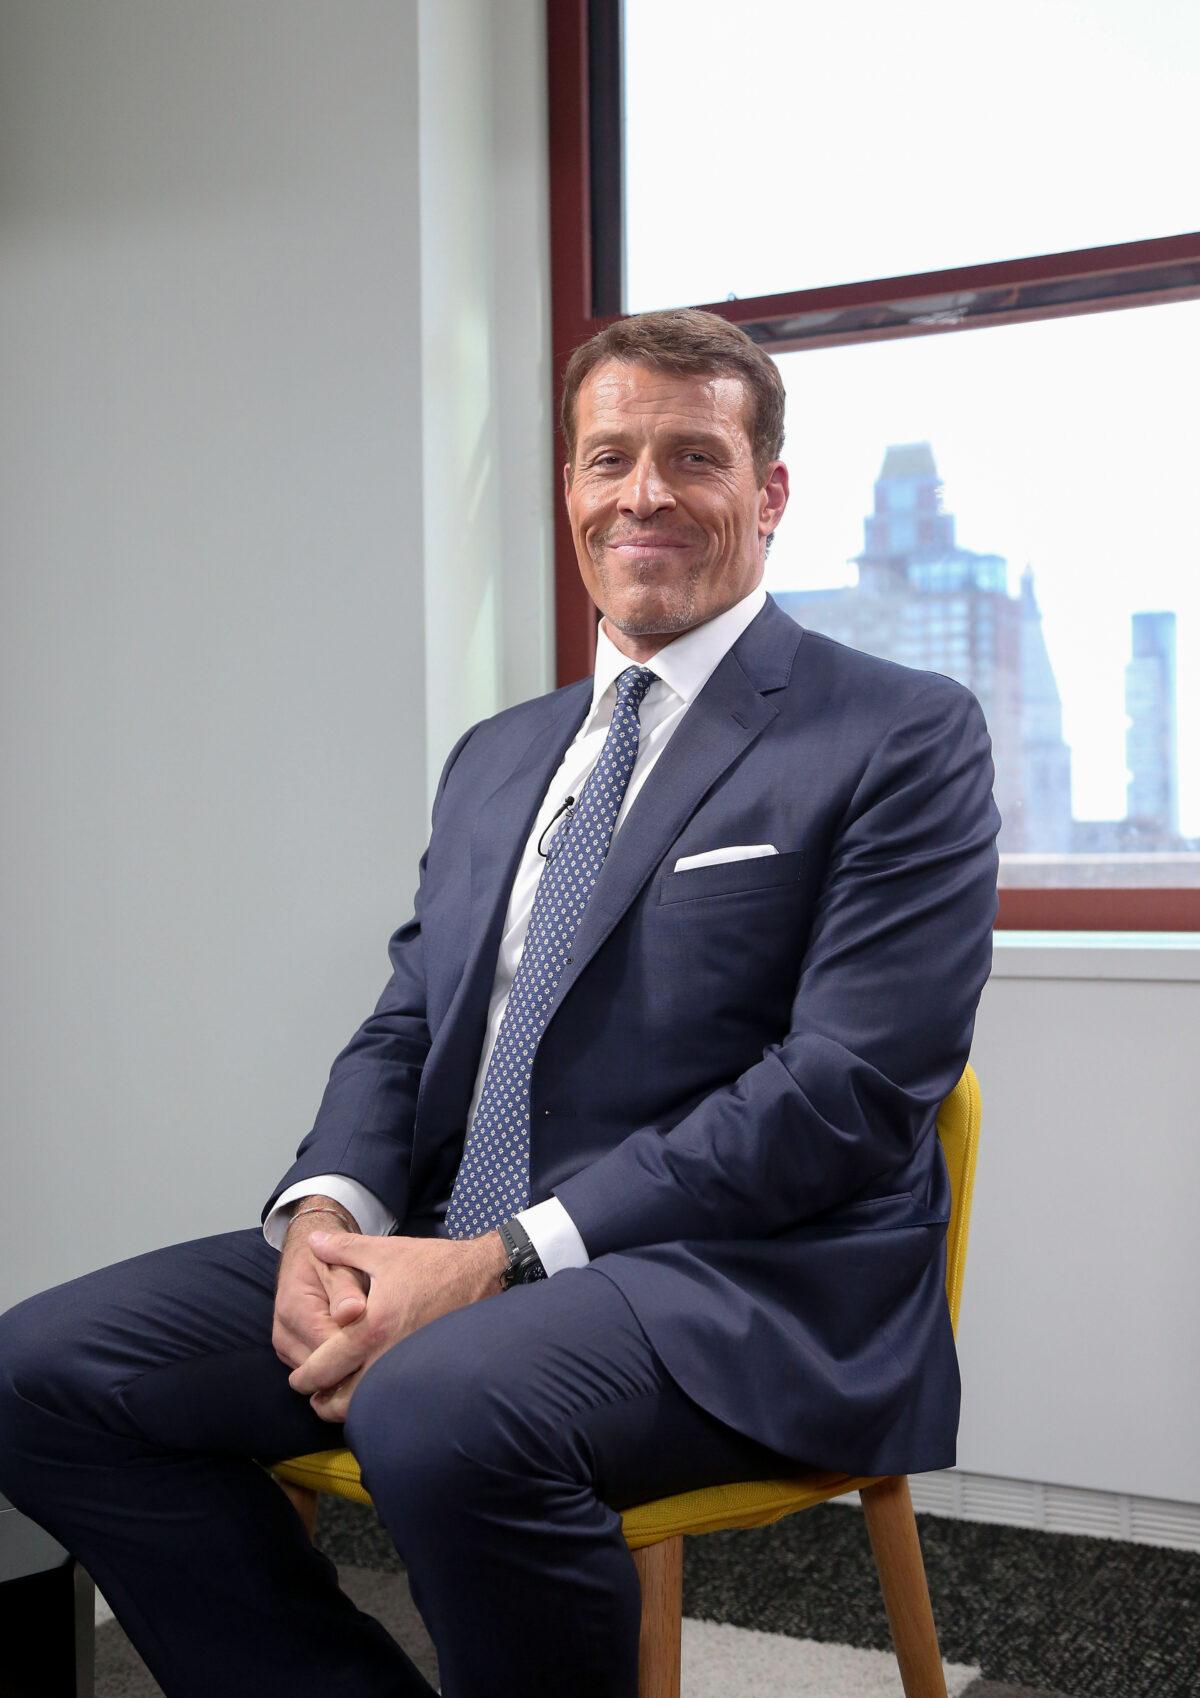 Tony Robbins sits down for an interview at The Empire State Building in New York City on Oct. 5, 2015. (Taylor Hill/Getty Images)